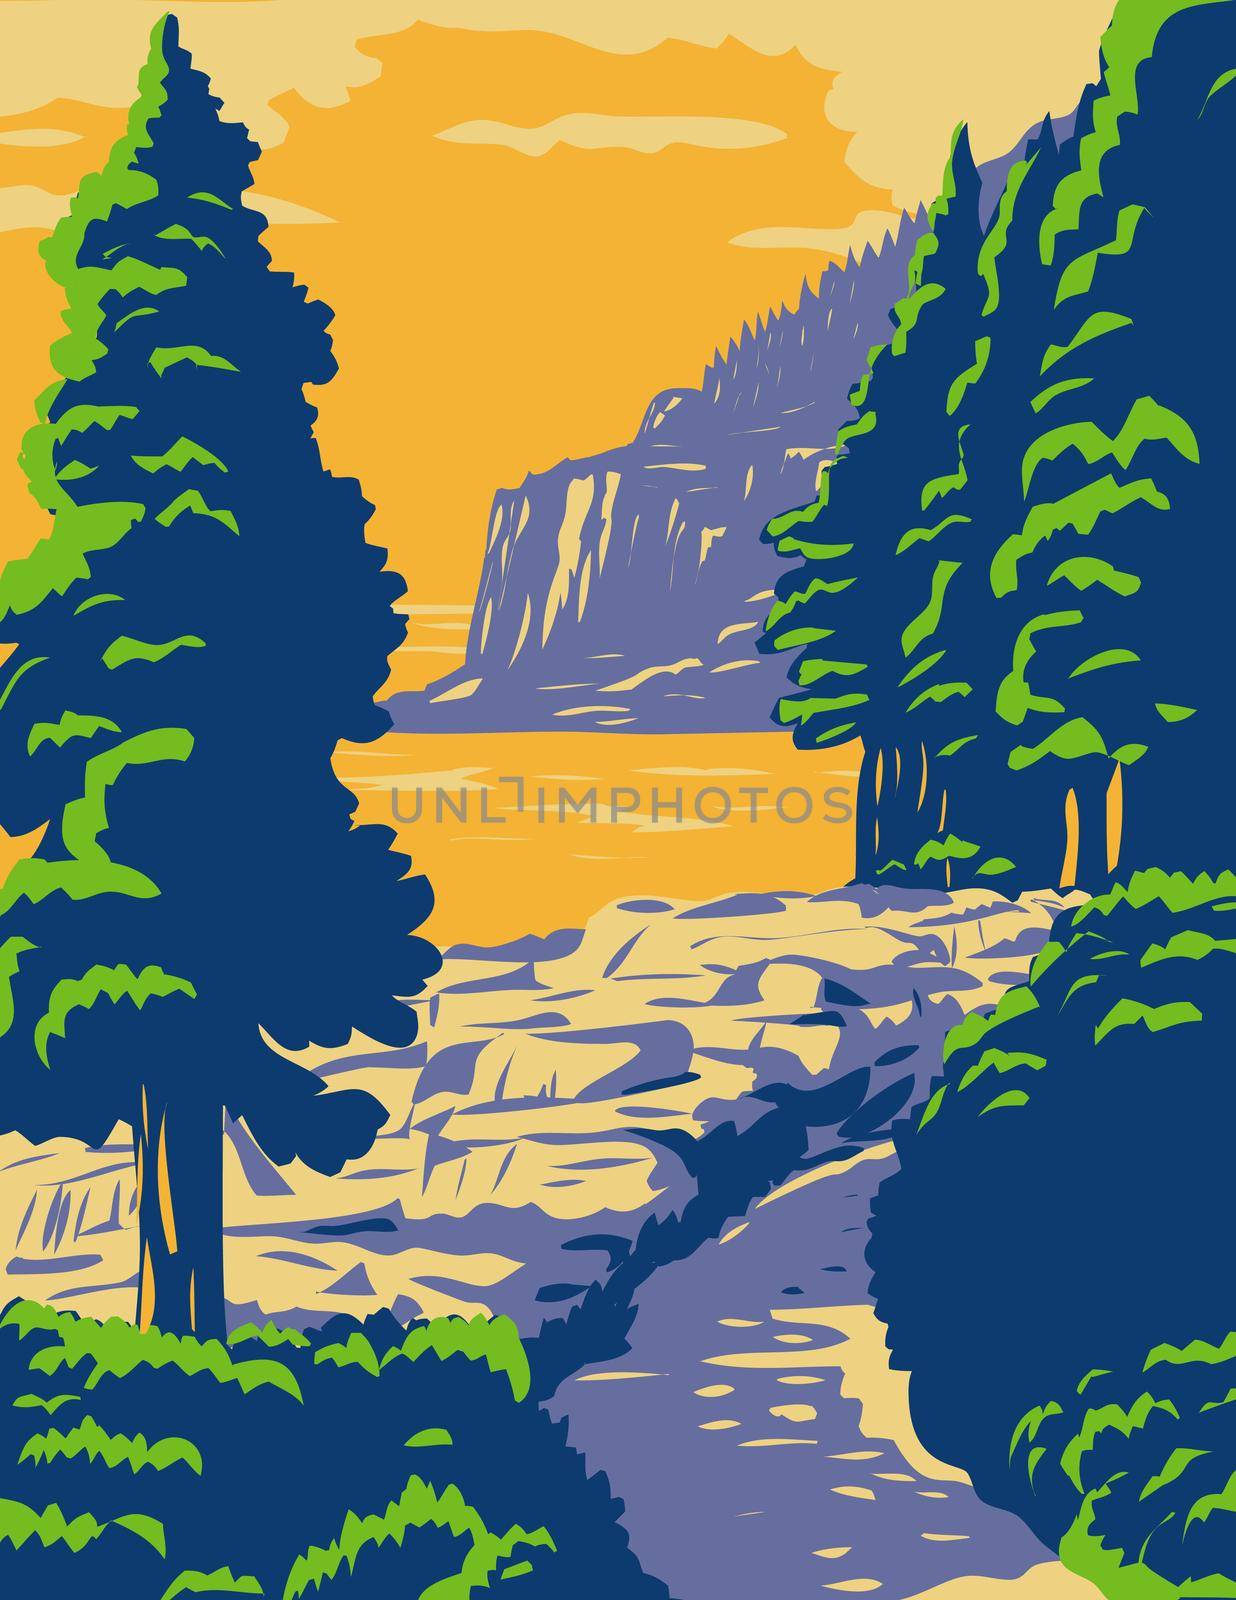 WPA poster art of Ocean Path with the Otter Cliff in Acadia National Park, a recreation area on Mount Desert Island, Maine United States in works project administration or federal art project style.